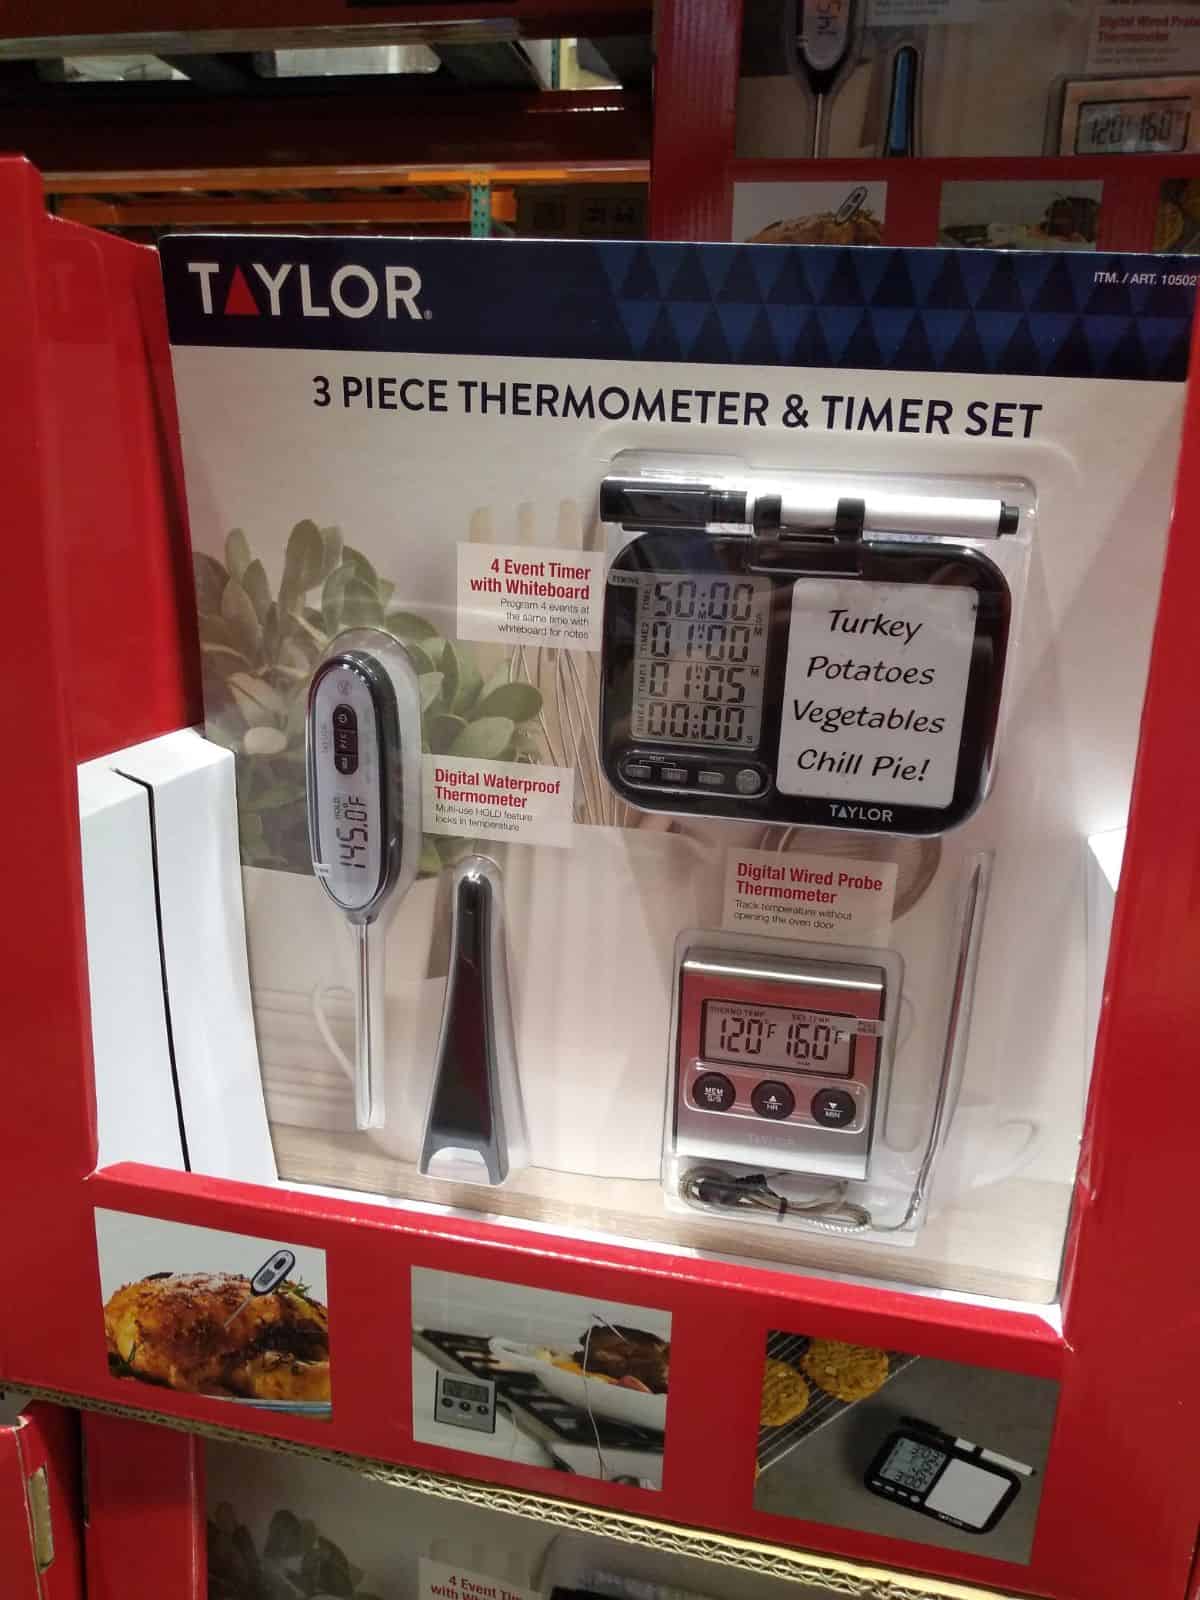 3 piece taylor thermometer & timer set on display at Costco.